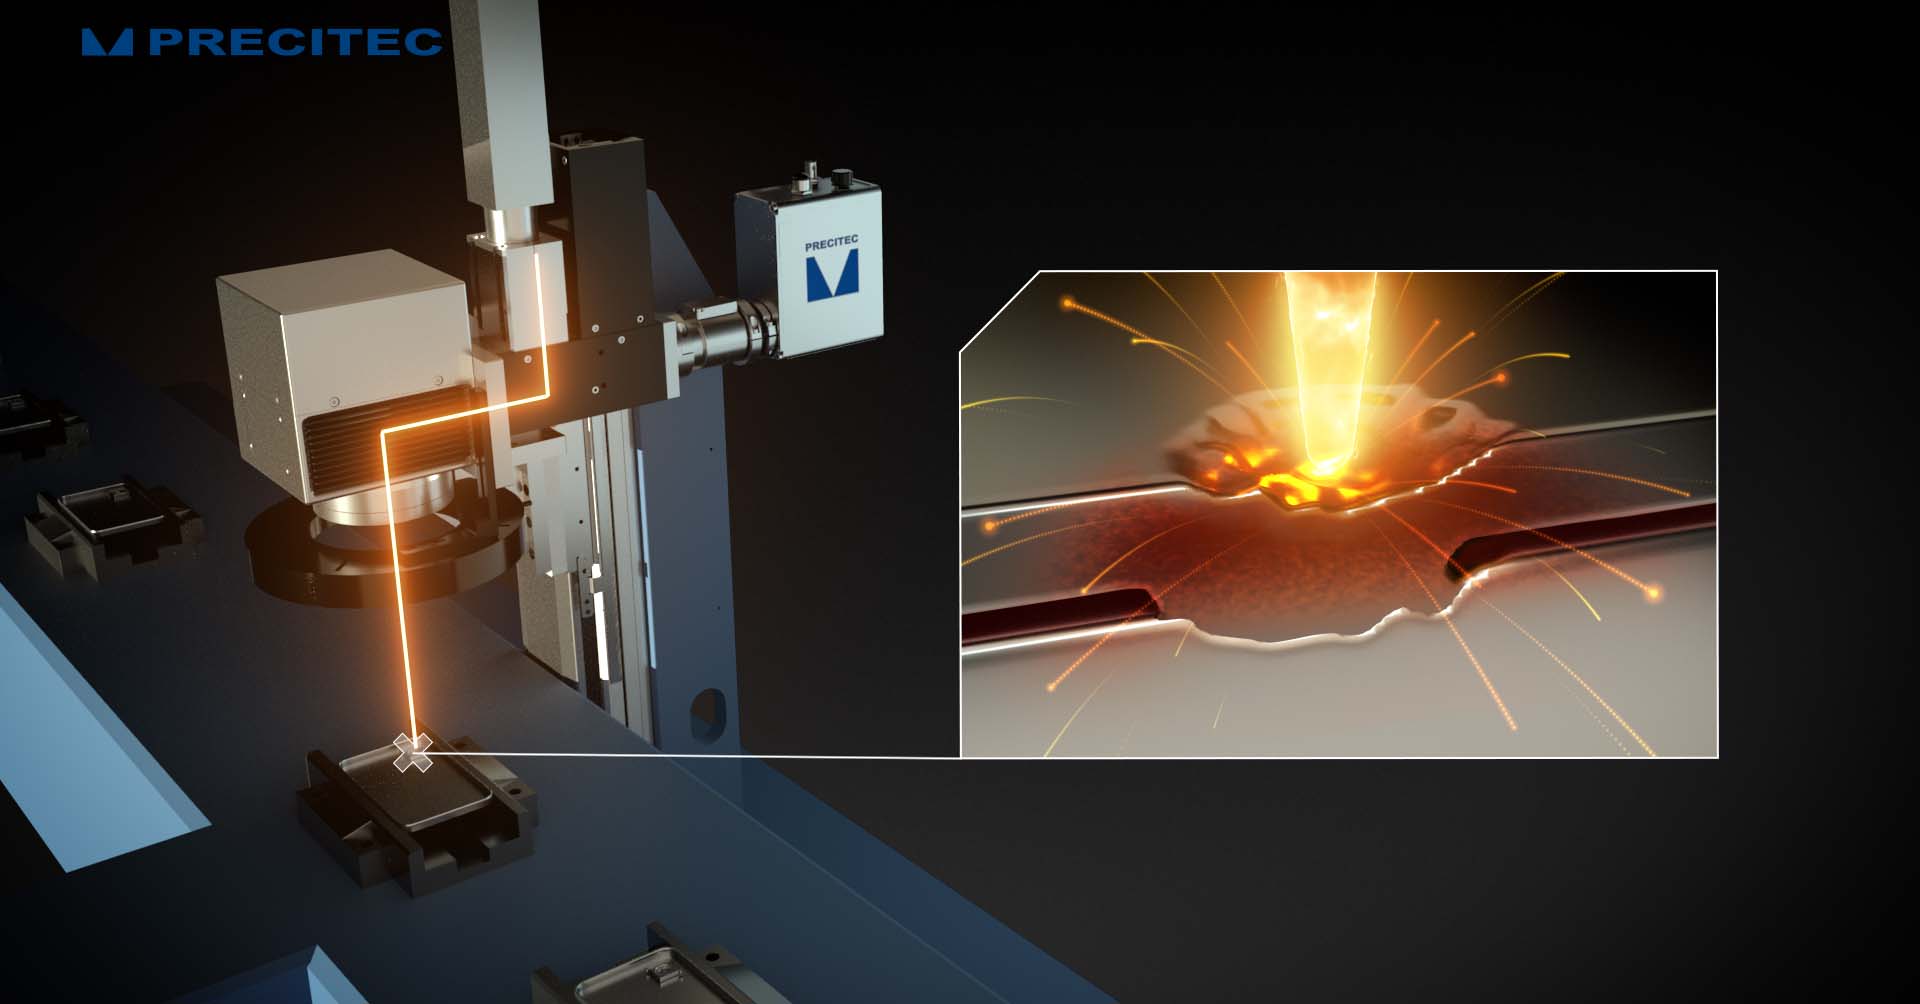 Quality control of laser welding processes